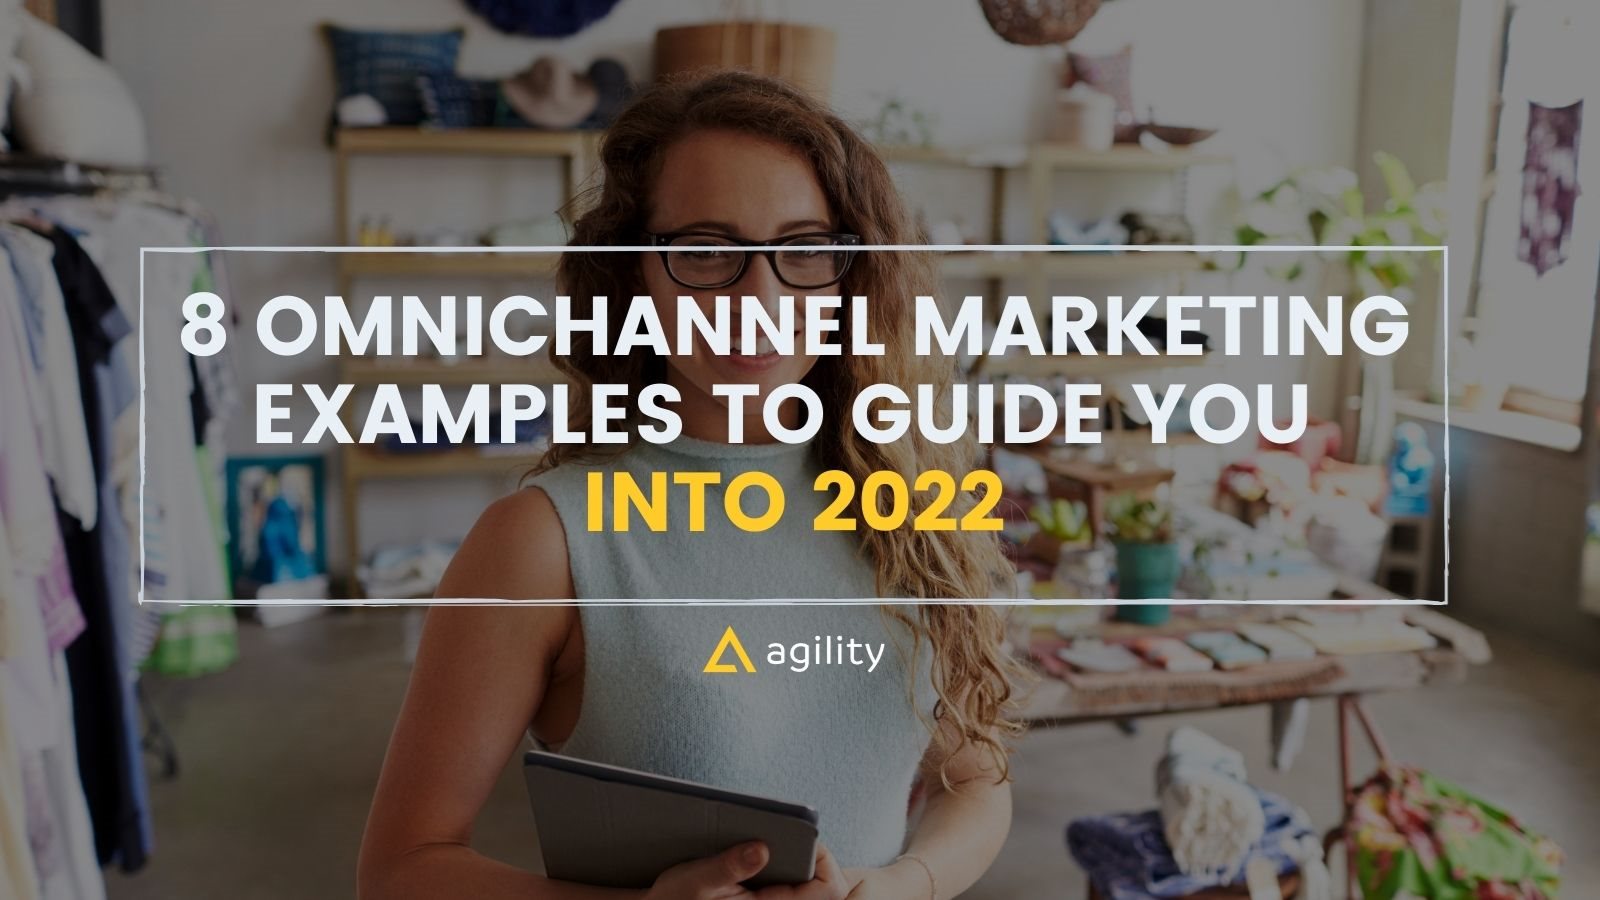 8 Omnichannel Marketing Examples To Guide You Into 2022